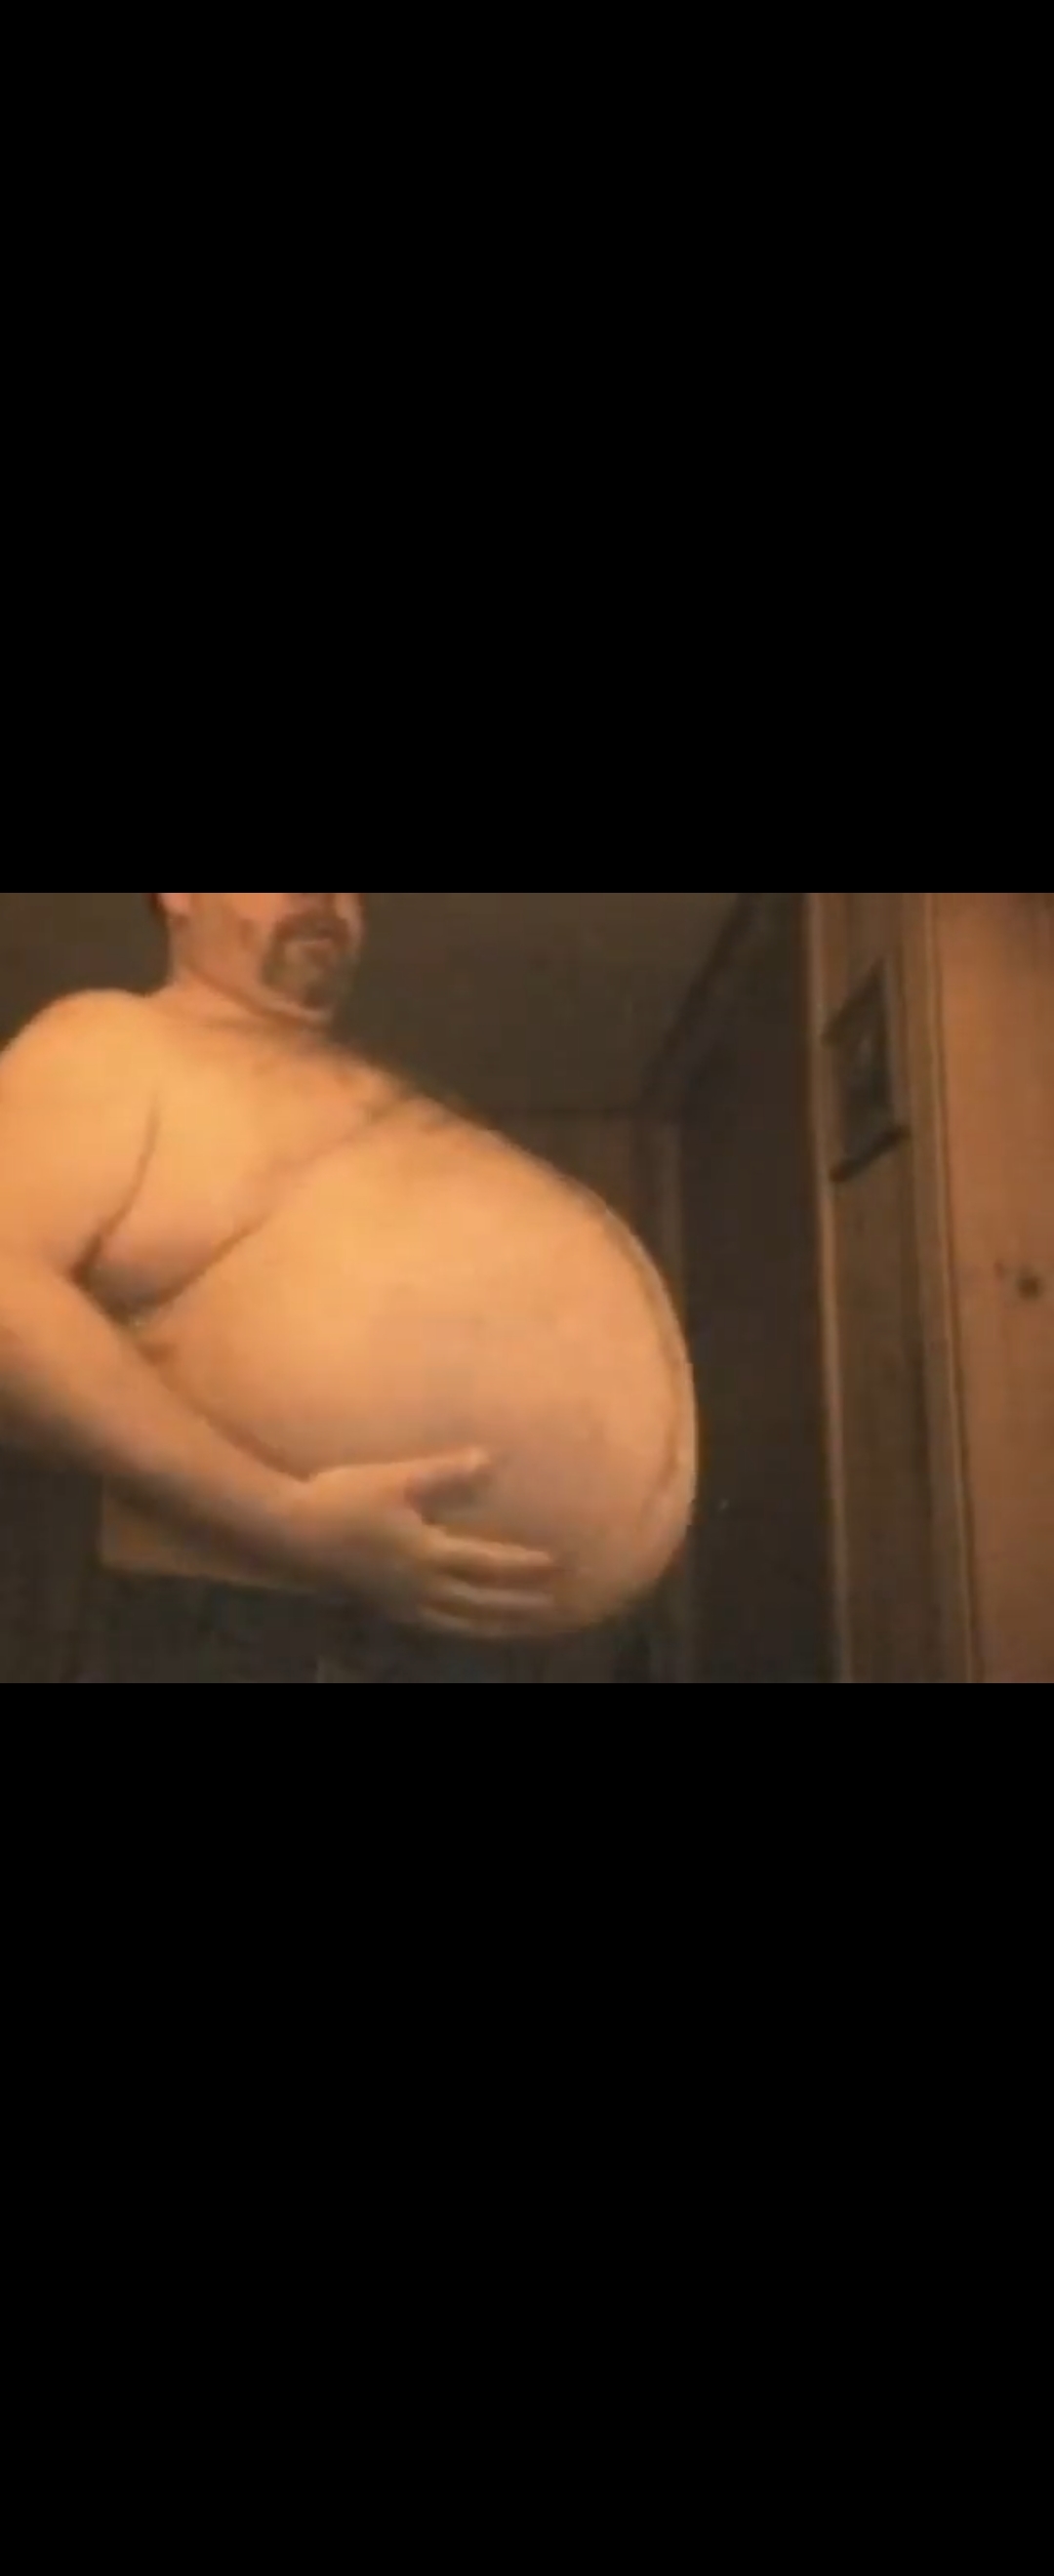 Massive belly - video 4